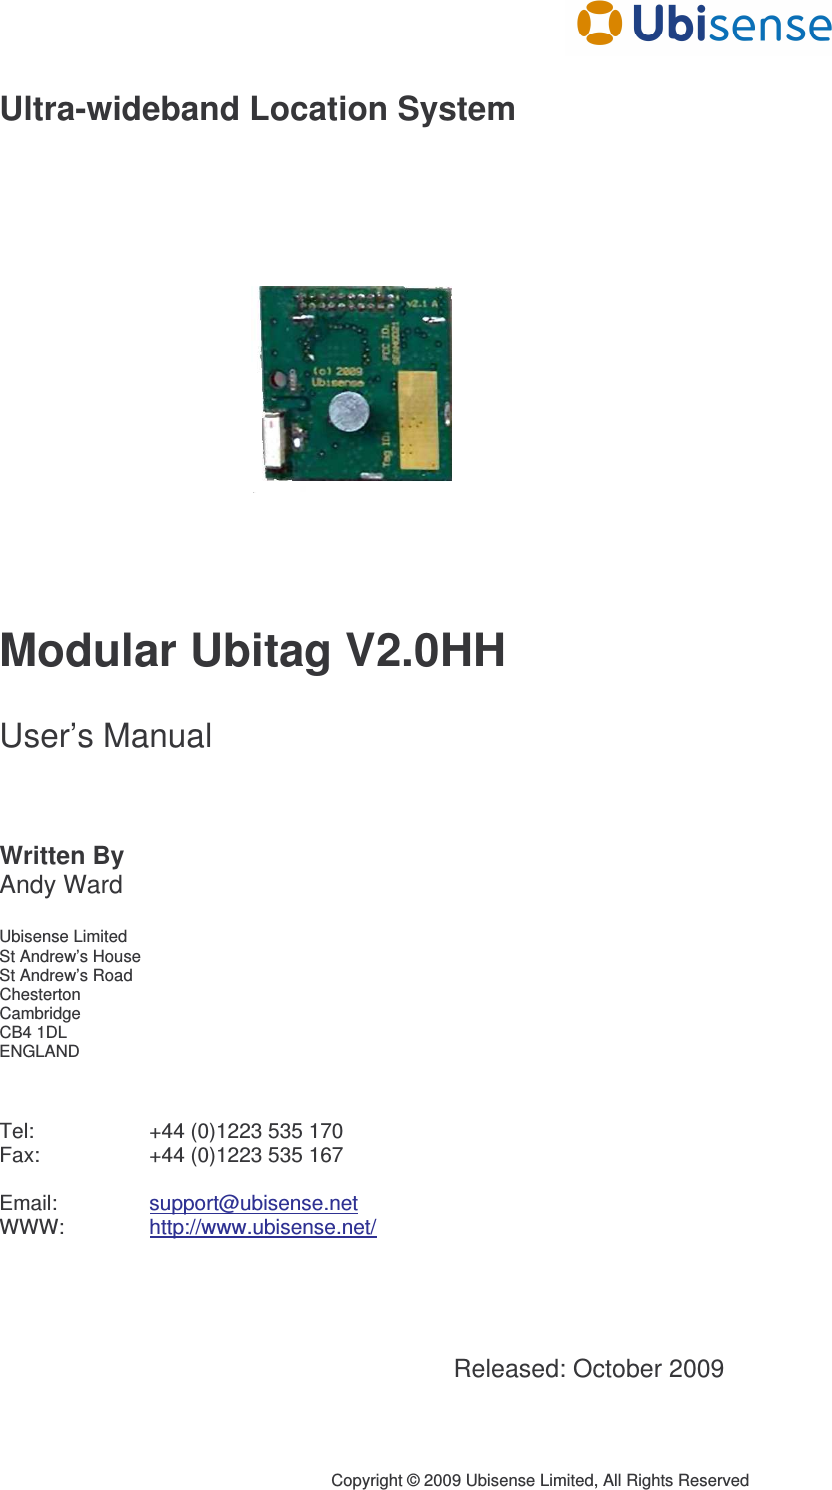      Copyright © 2009 Ubisense Limited, All Rights Reserved Ultra-wideband Location System             Modular Ubitag V2.0HH  User’s Manual    Written By Andy Ward  Ubisense Limited St Andrew’s House St Andrew’s Road Chesterton Cambridge CB4 1DL ENGLAND    Tel:     +44 (0)1223 535 170 Fax:     +44 (0)1223 535 167  Email:     support@ubisense.net WWW:    http://www.ubisense.net/     Released: October 2009 